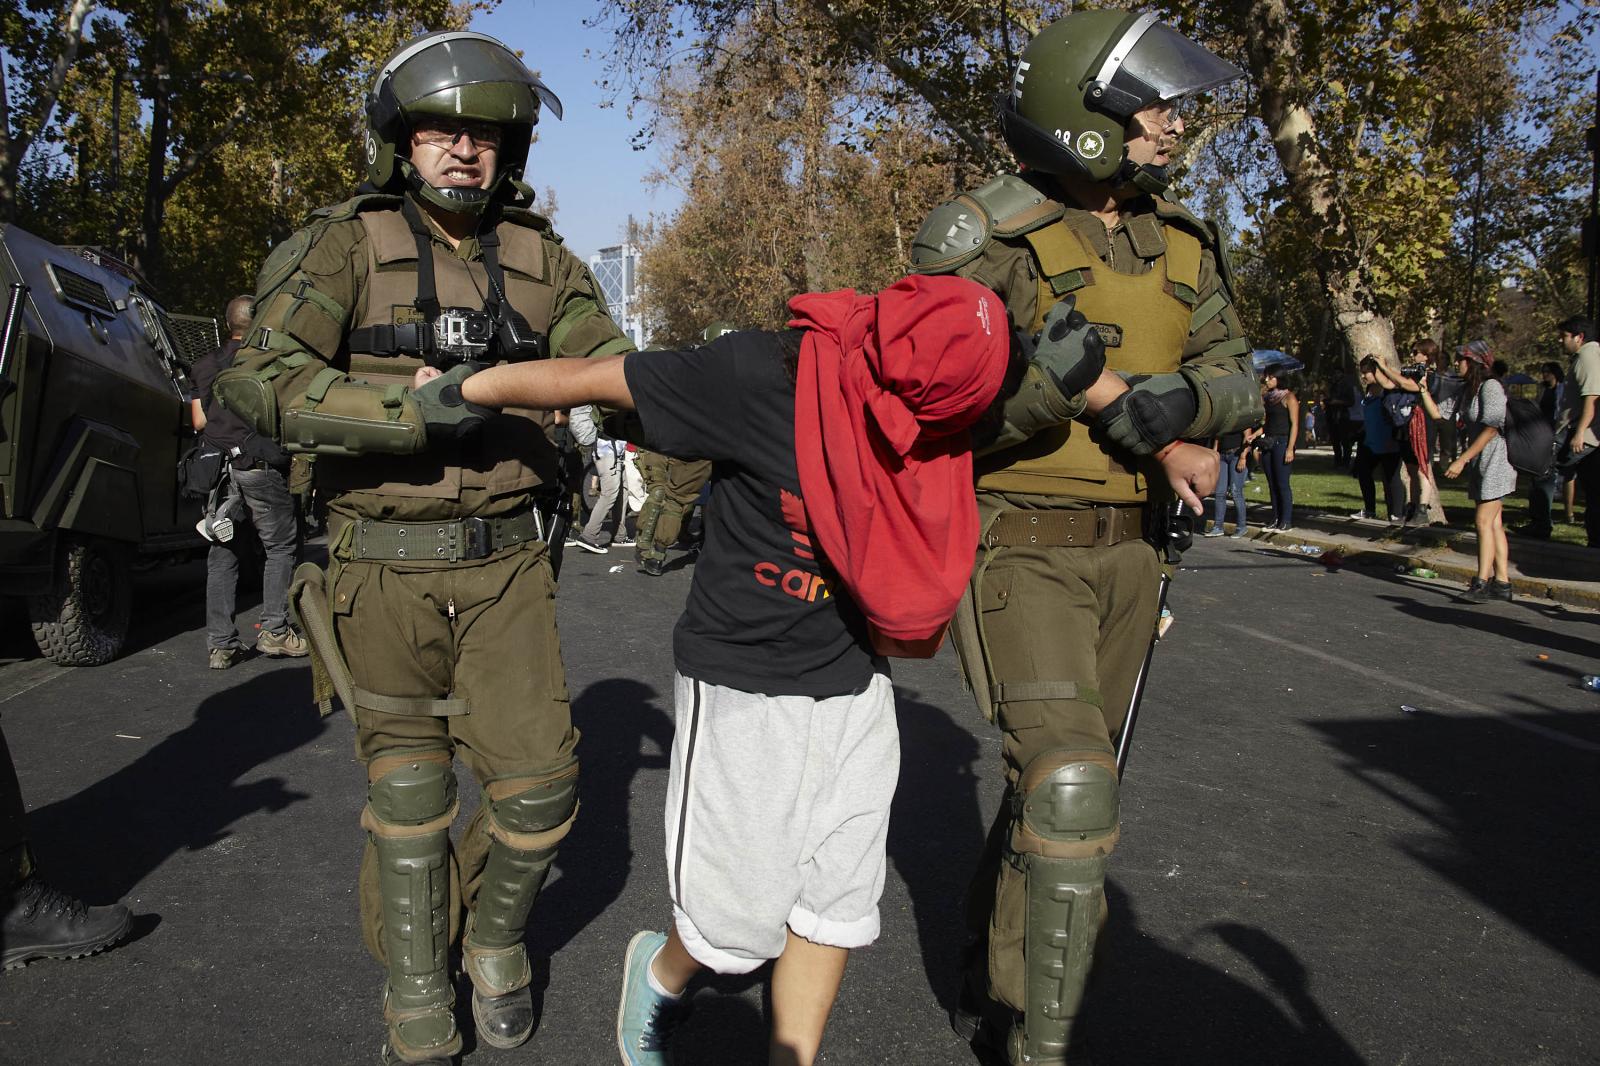 Image from CHILE: From politics to social unrest.